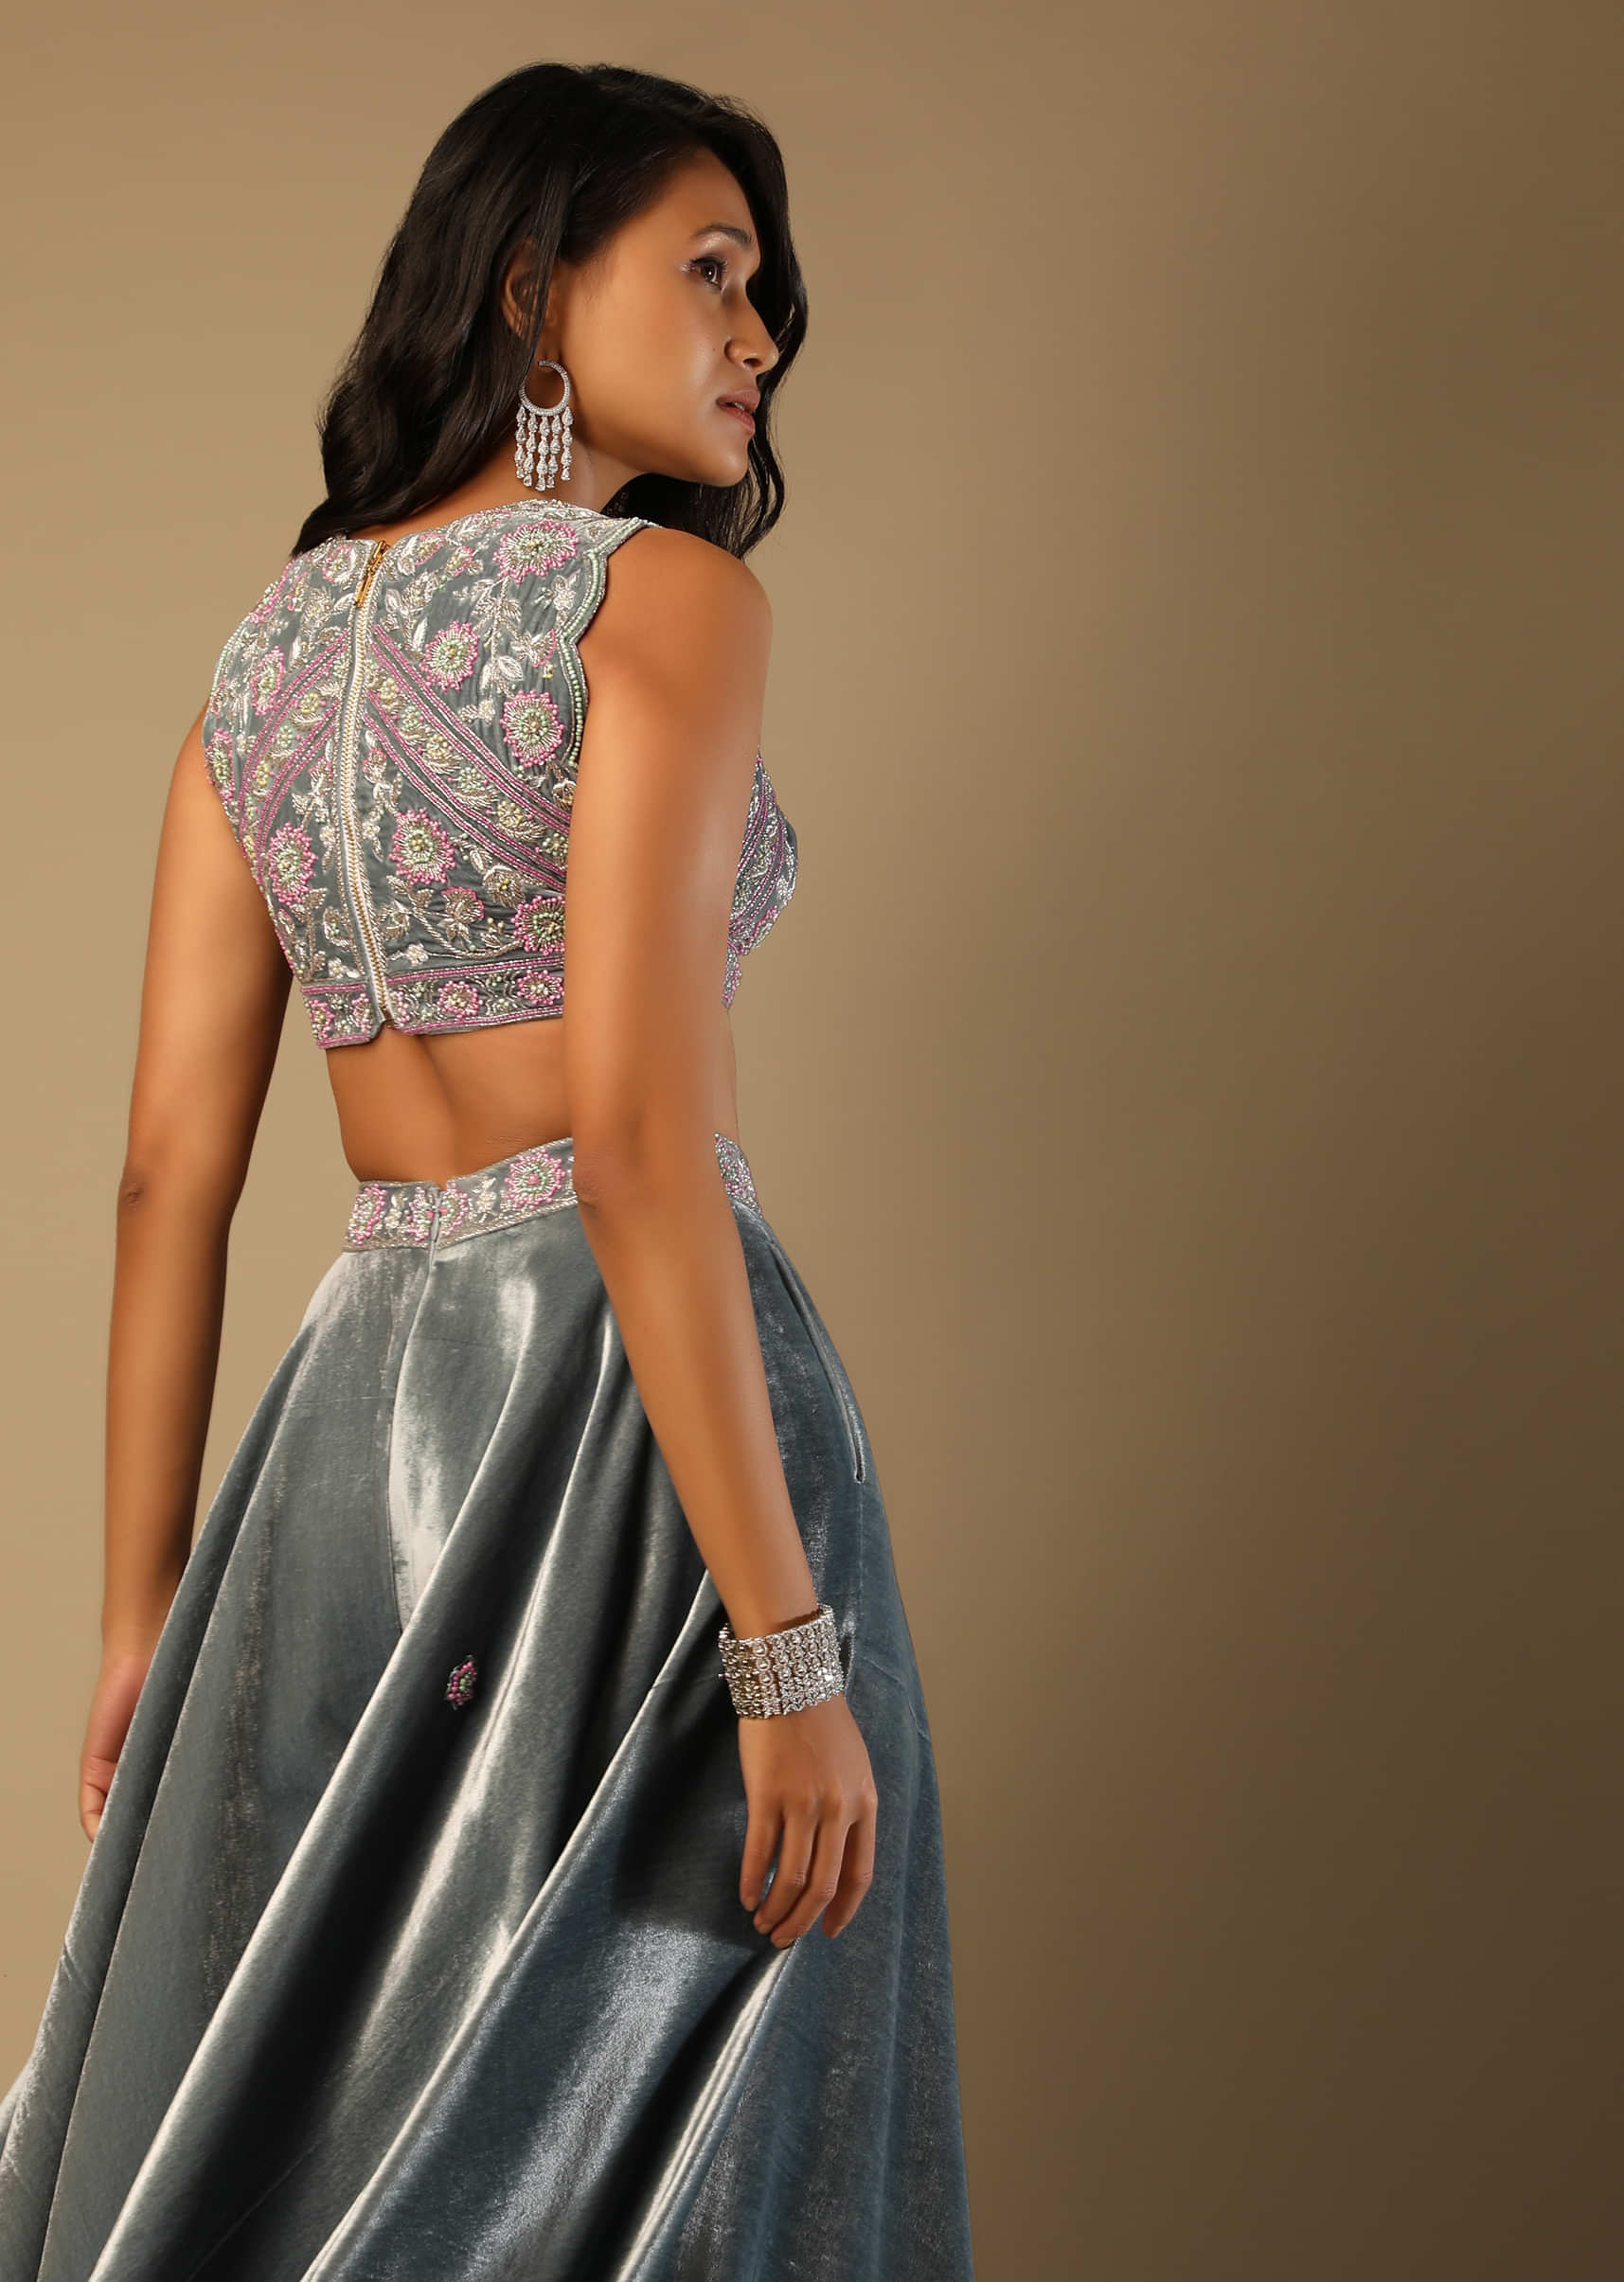 Frozen Blue Palazzo And Crop Top Suit With Multi Colored Hand Embroidery And Attached Belt Bag  